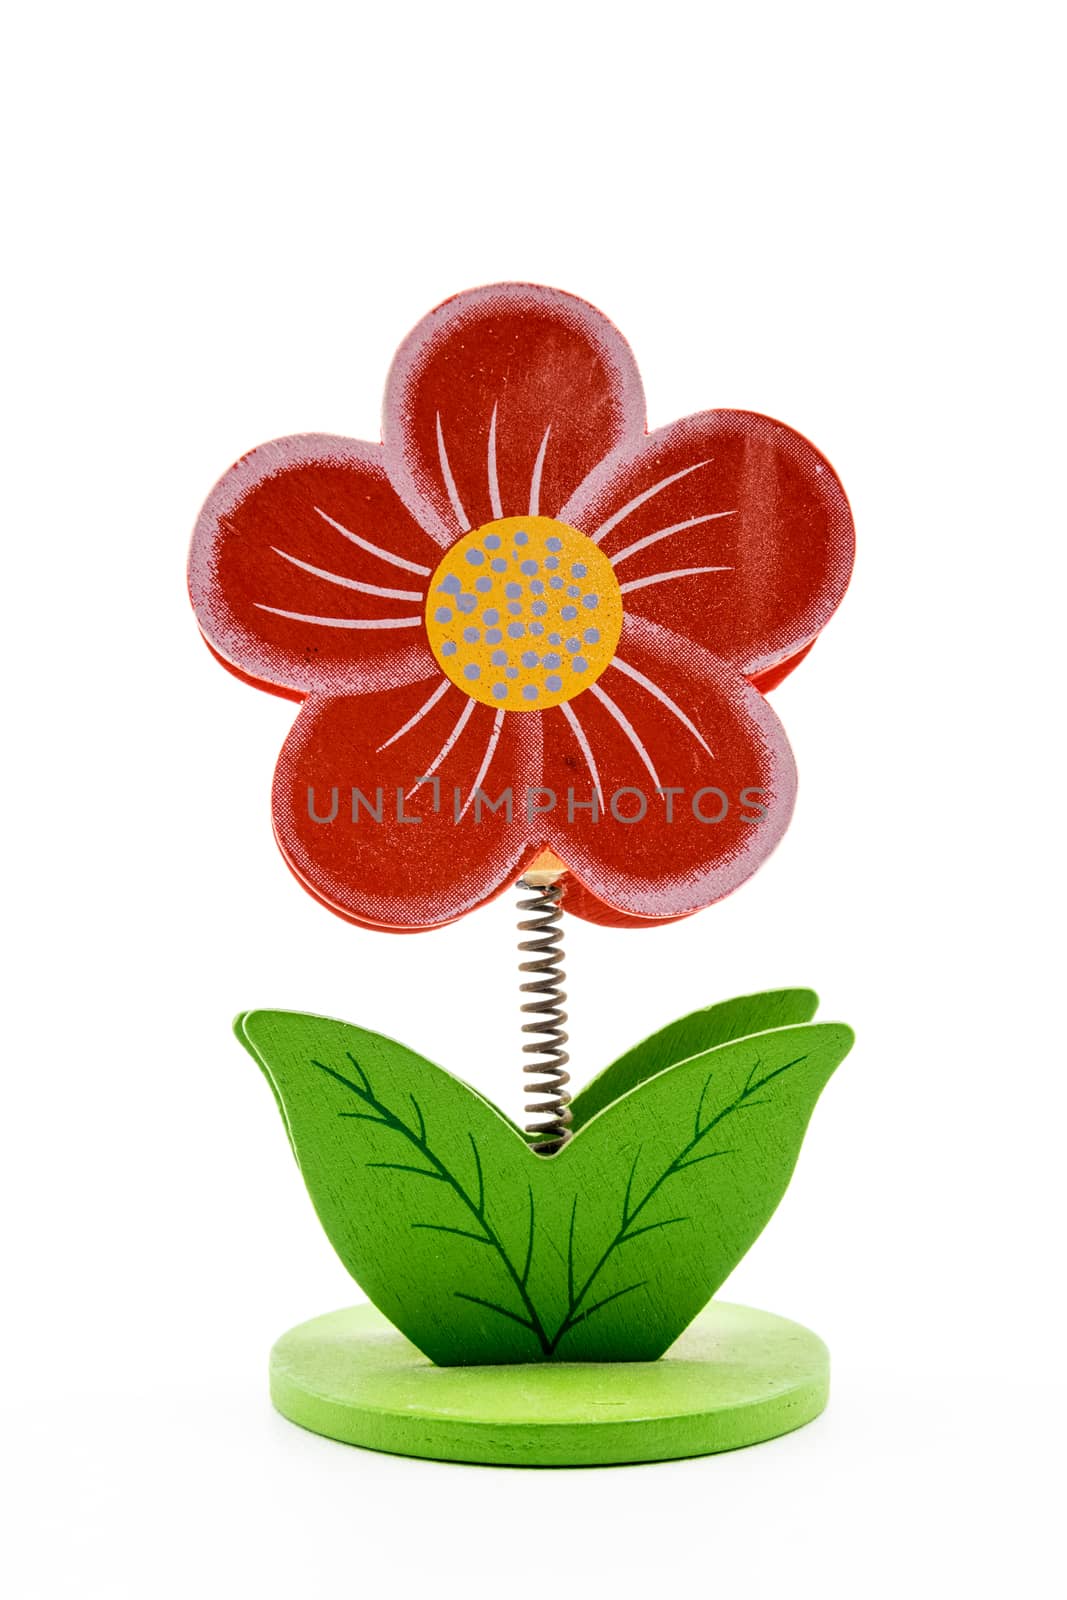 Red wooden flower with stem formed by a spring on white background.